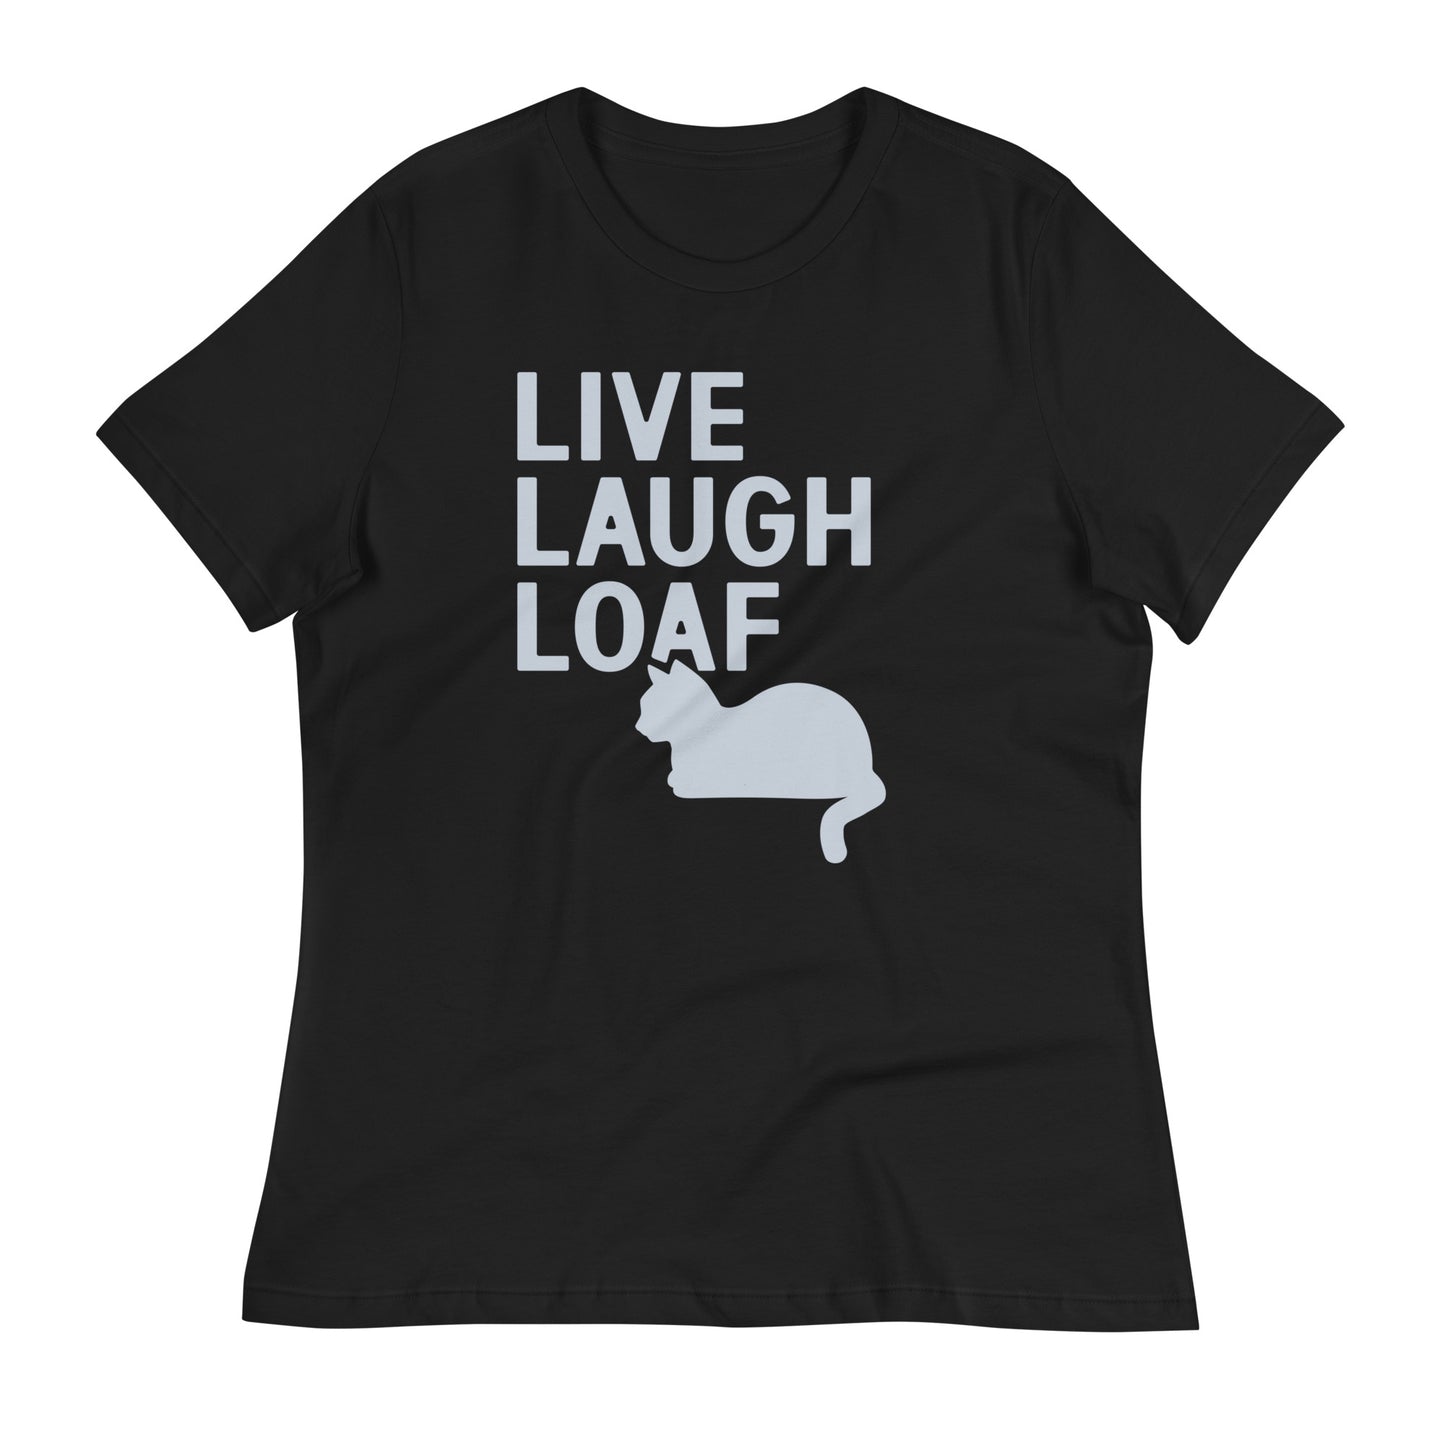 Live Laugh Loaf Women's Signature Tee